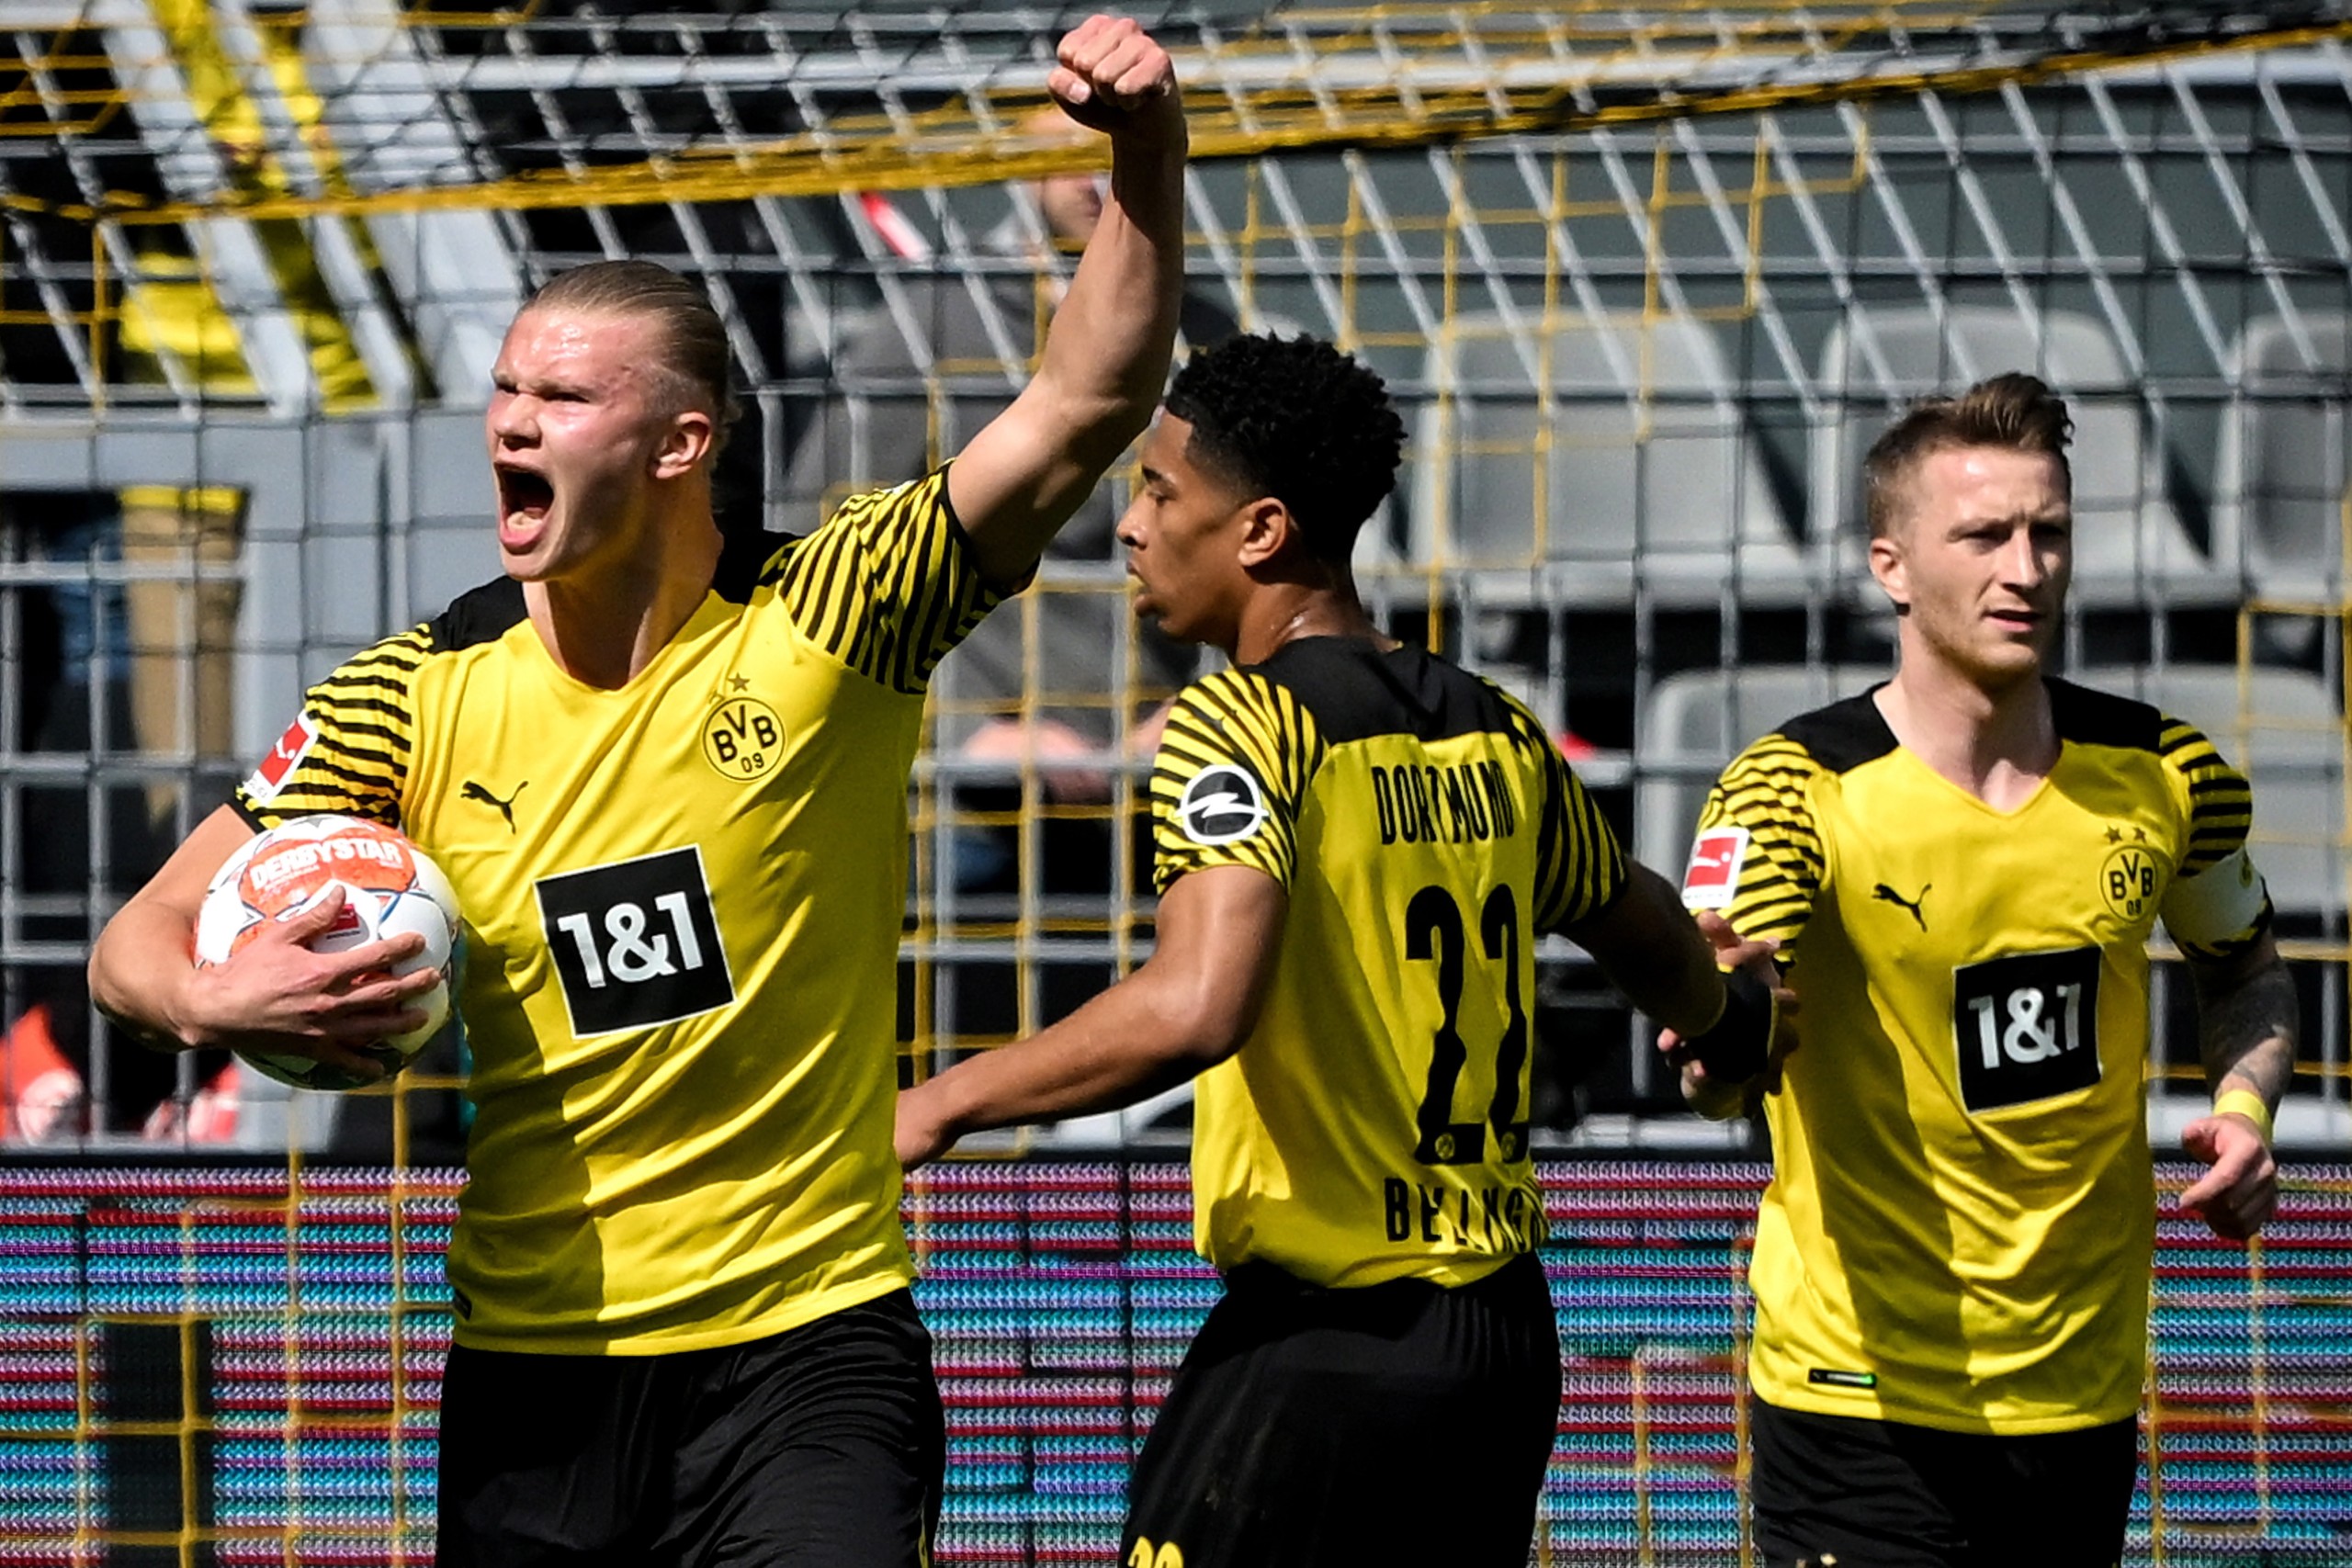 epa09918372 Dortmund's Erling Haaland (L) celebrates after scoring the 1-2 goal from the penalty spot during the German Bundesliga soccer match between Borussia Dortmund and VfL Bochum at Signal Iduna Park in Dortmund, Germany, 30 April 2022.  EPA/SASCHA STEINBACH CONDITIONS - ATTENTION: The DFL regulations prohibit any use of photographs as image sequences and/or quasi-video.